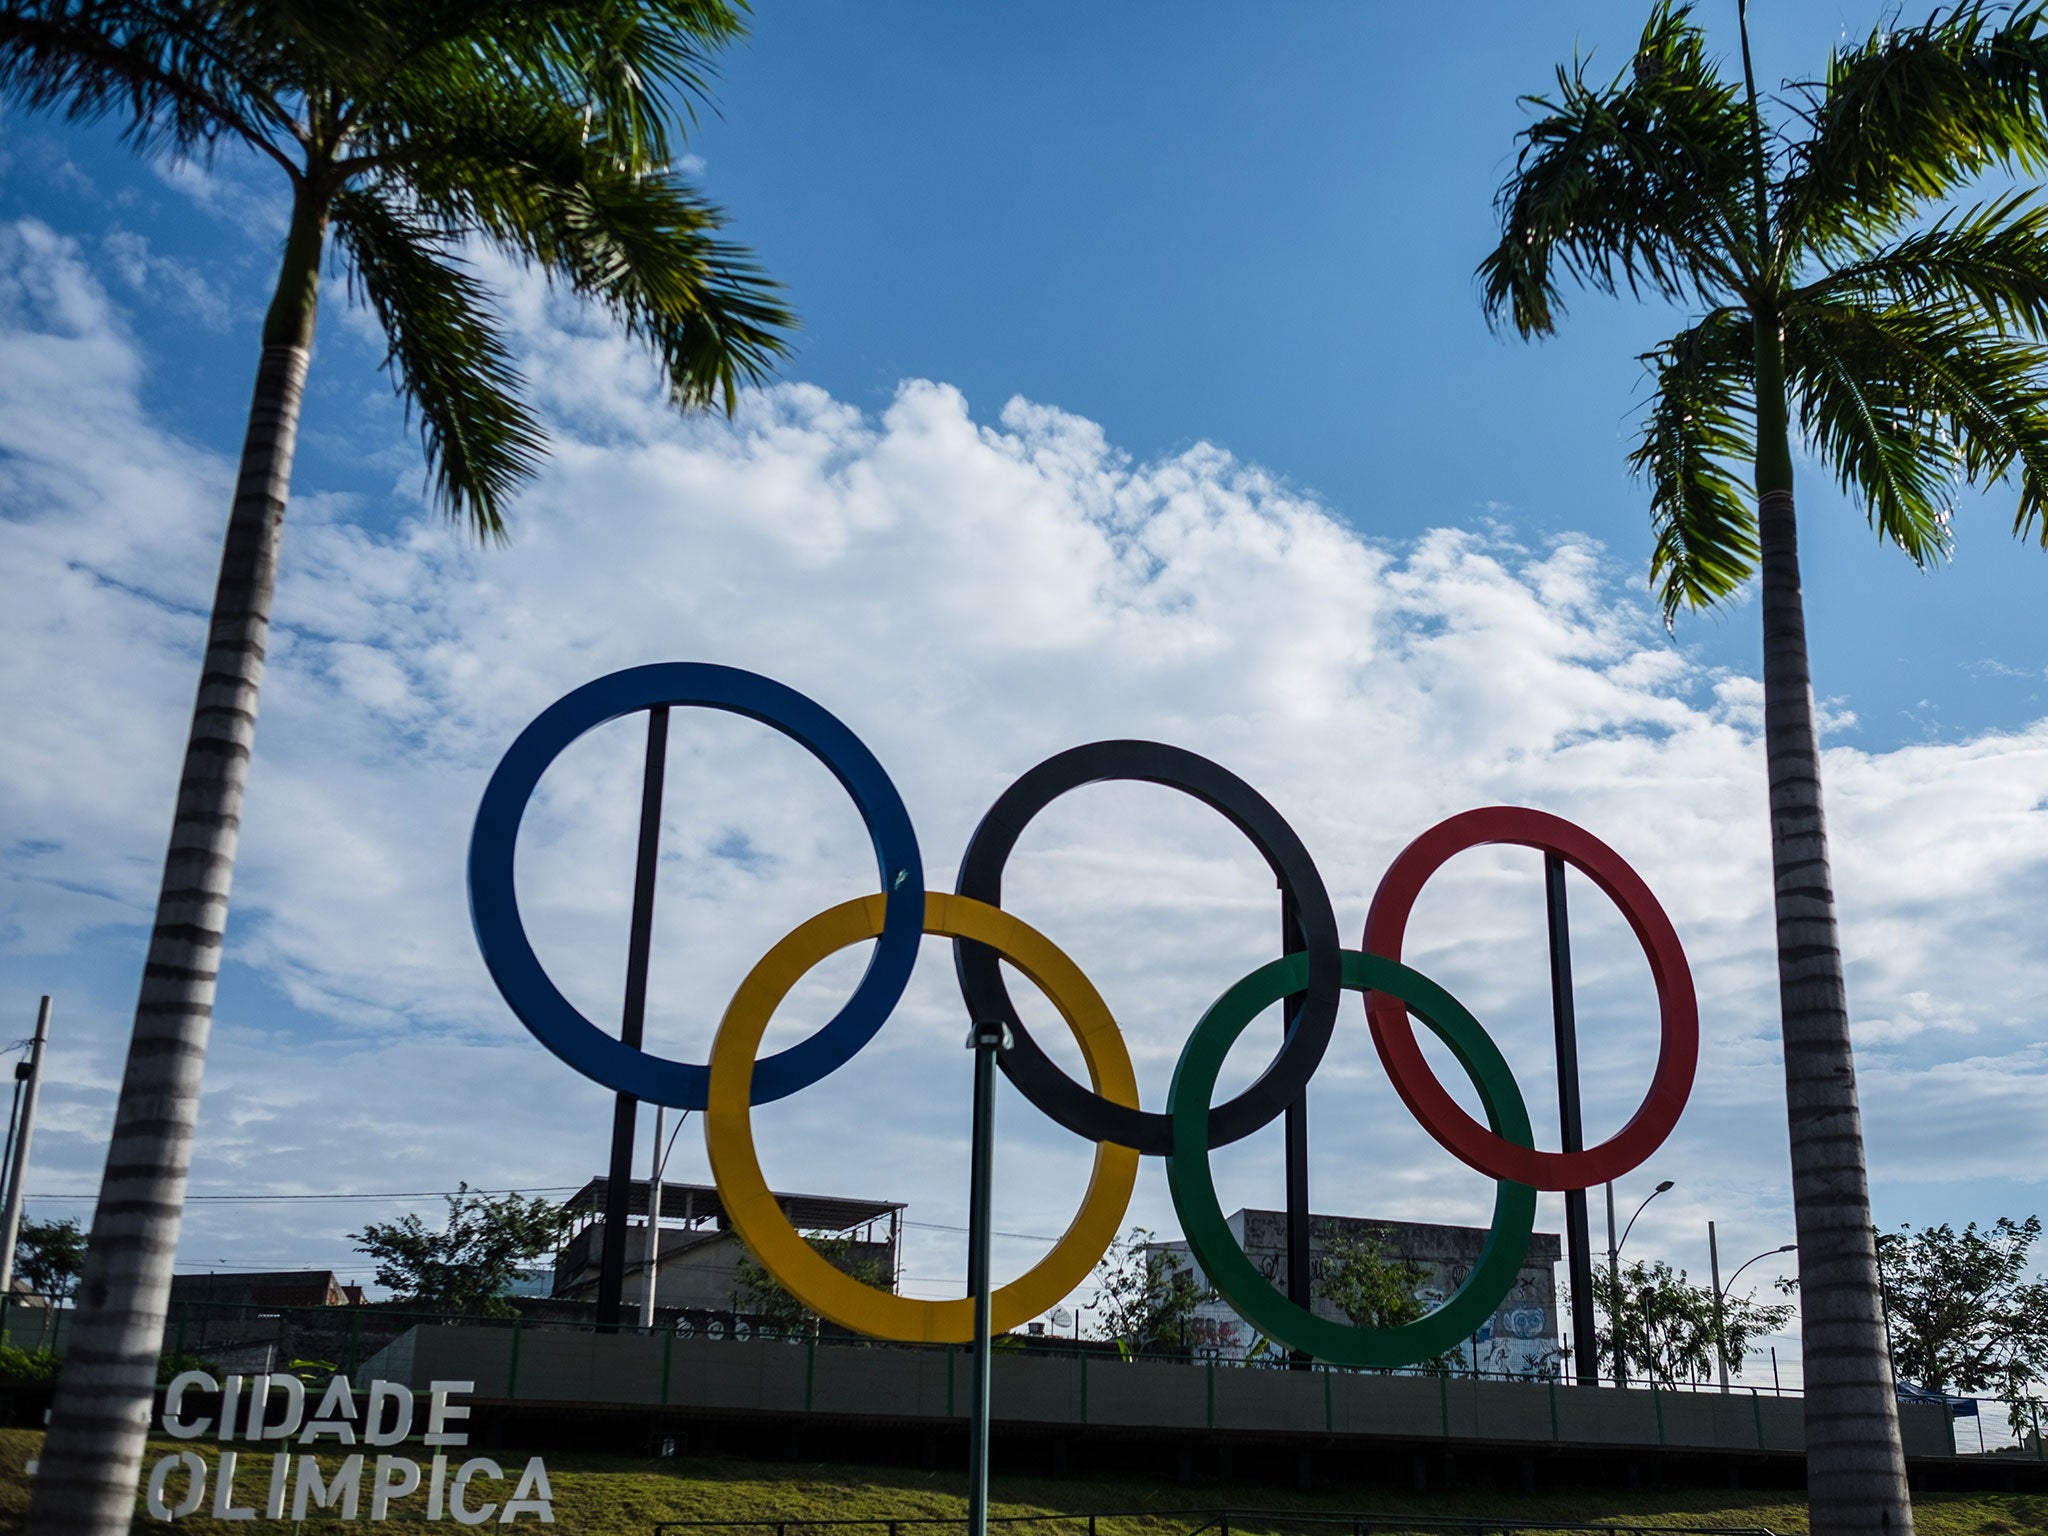 The Olympic rings in Rio